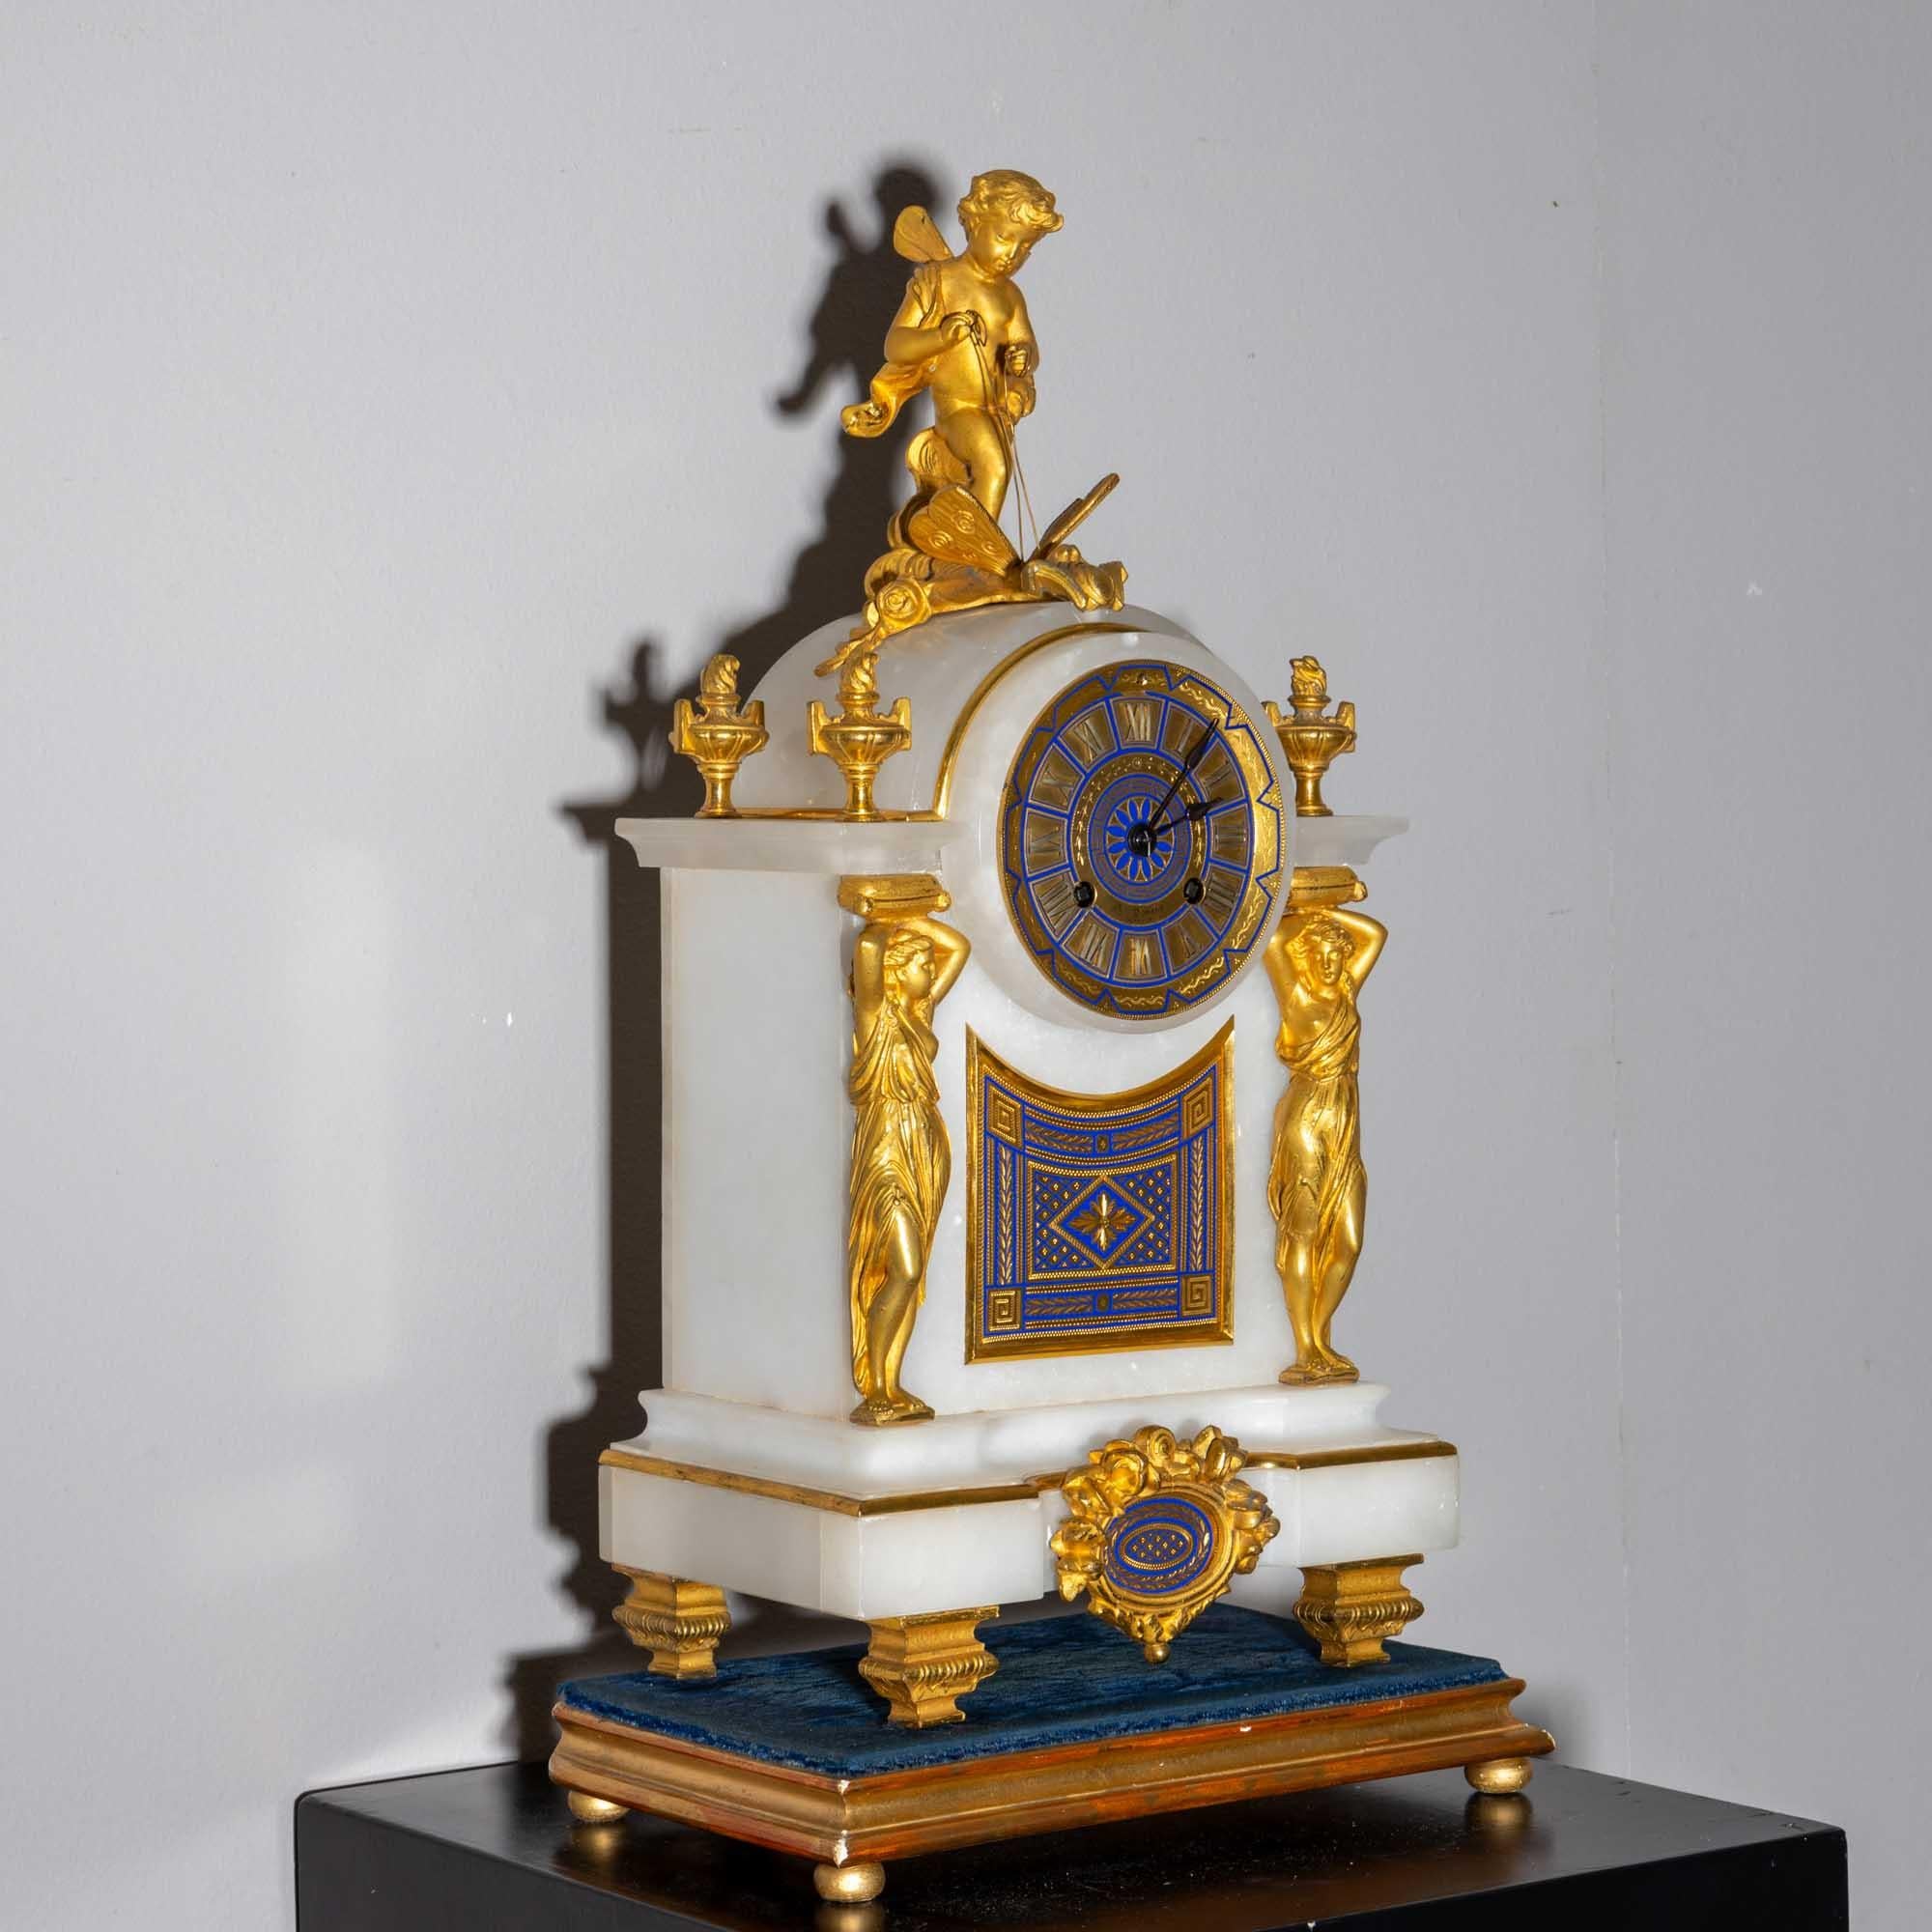 Mantel clock in an alabaster case with Roman hours, cobalt blue and gilded decoration in the form of caryatids, flaming urns and a winged putto riding a butterfly. The clock stands on a pedestal covered in blue velvet. Signed 